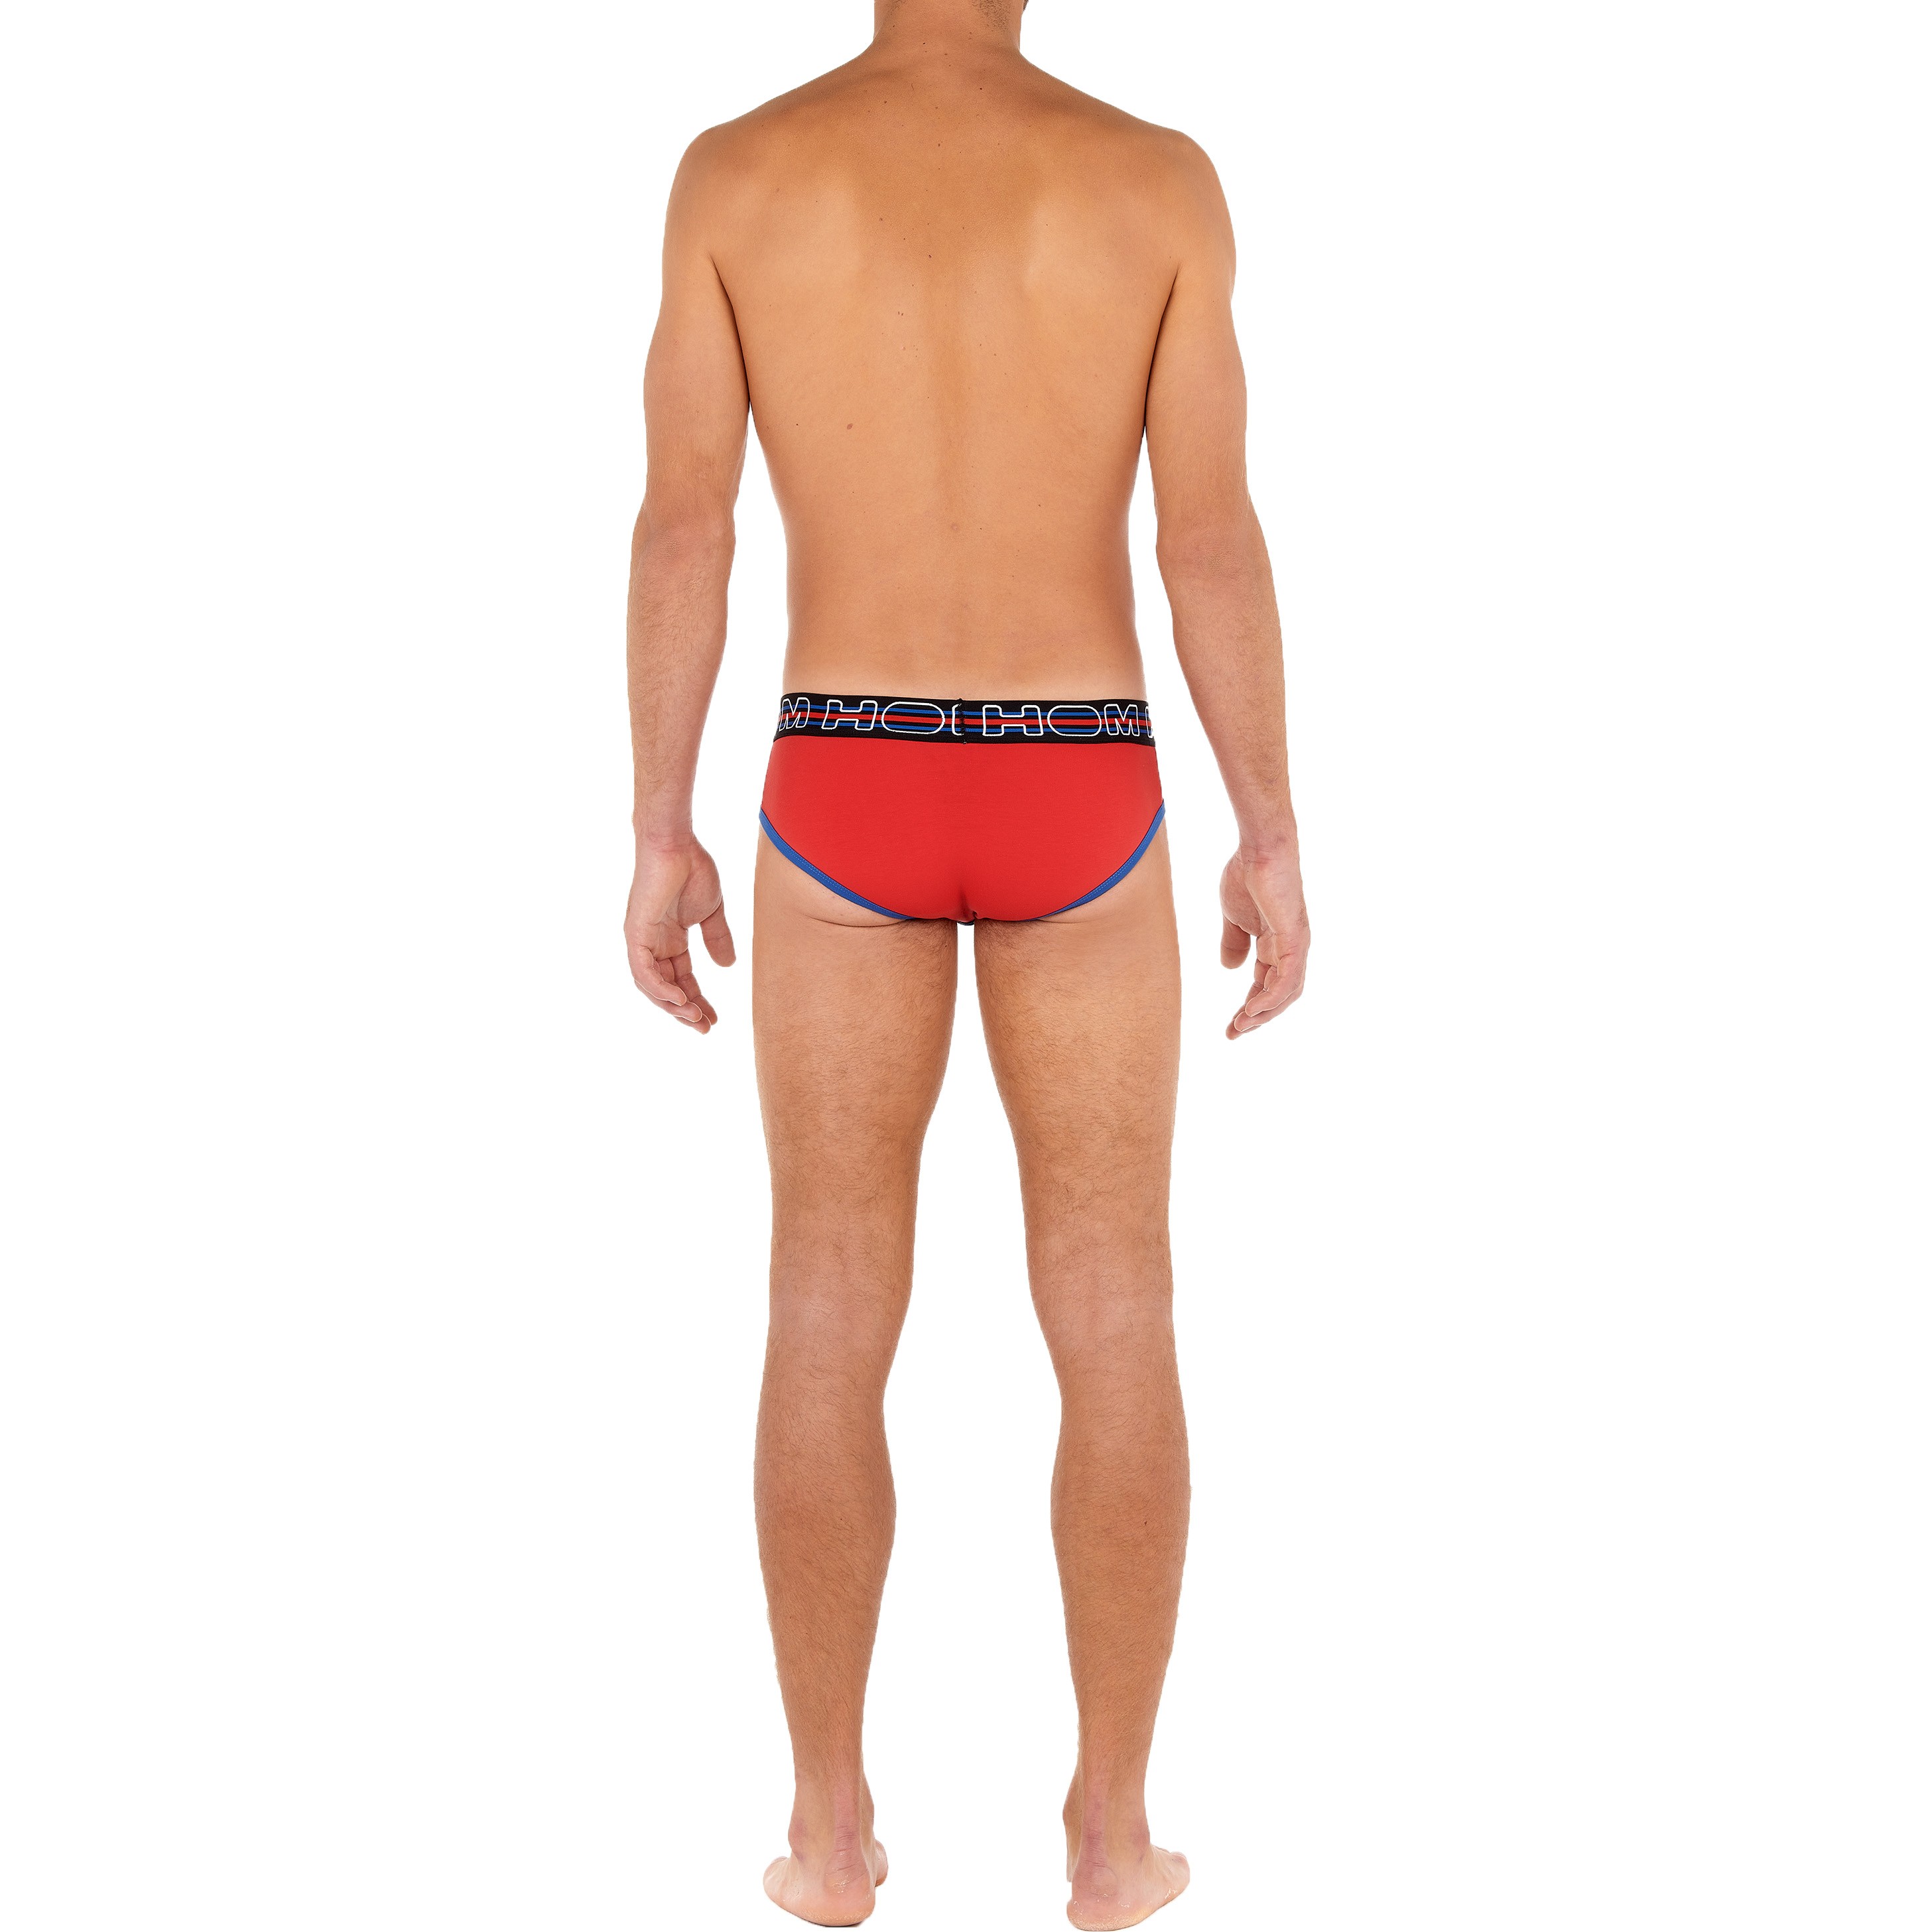 Mini slip HO1 Cotton up LIMITED EDITION - red: Briefs for man brand